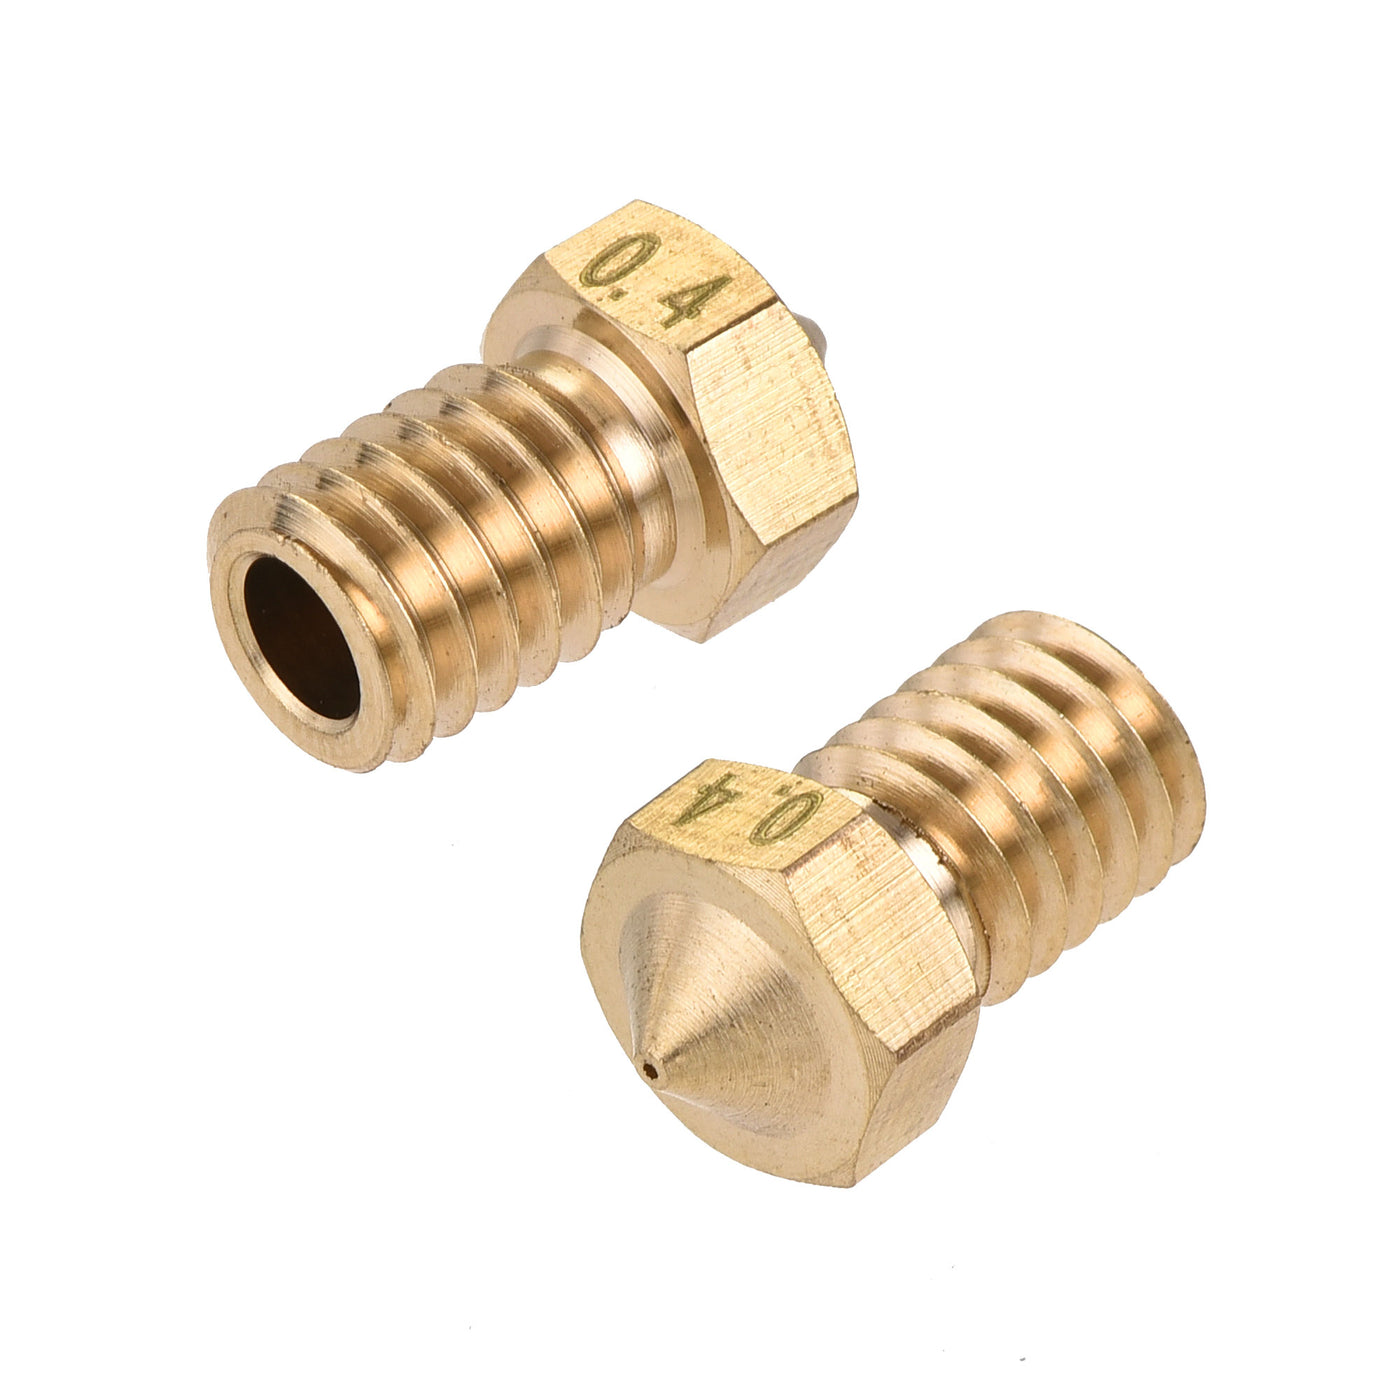 uxcell Uxcell 0.4mm 3D Printer Nozzle, 30pcs M6 Thread for V5 V6 3mm Extruder Print, Brass